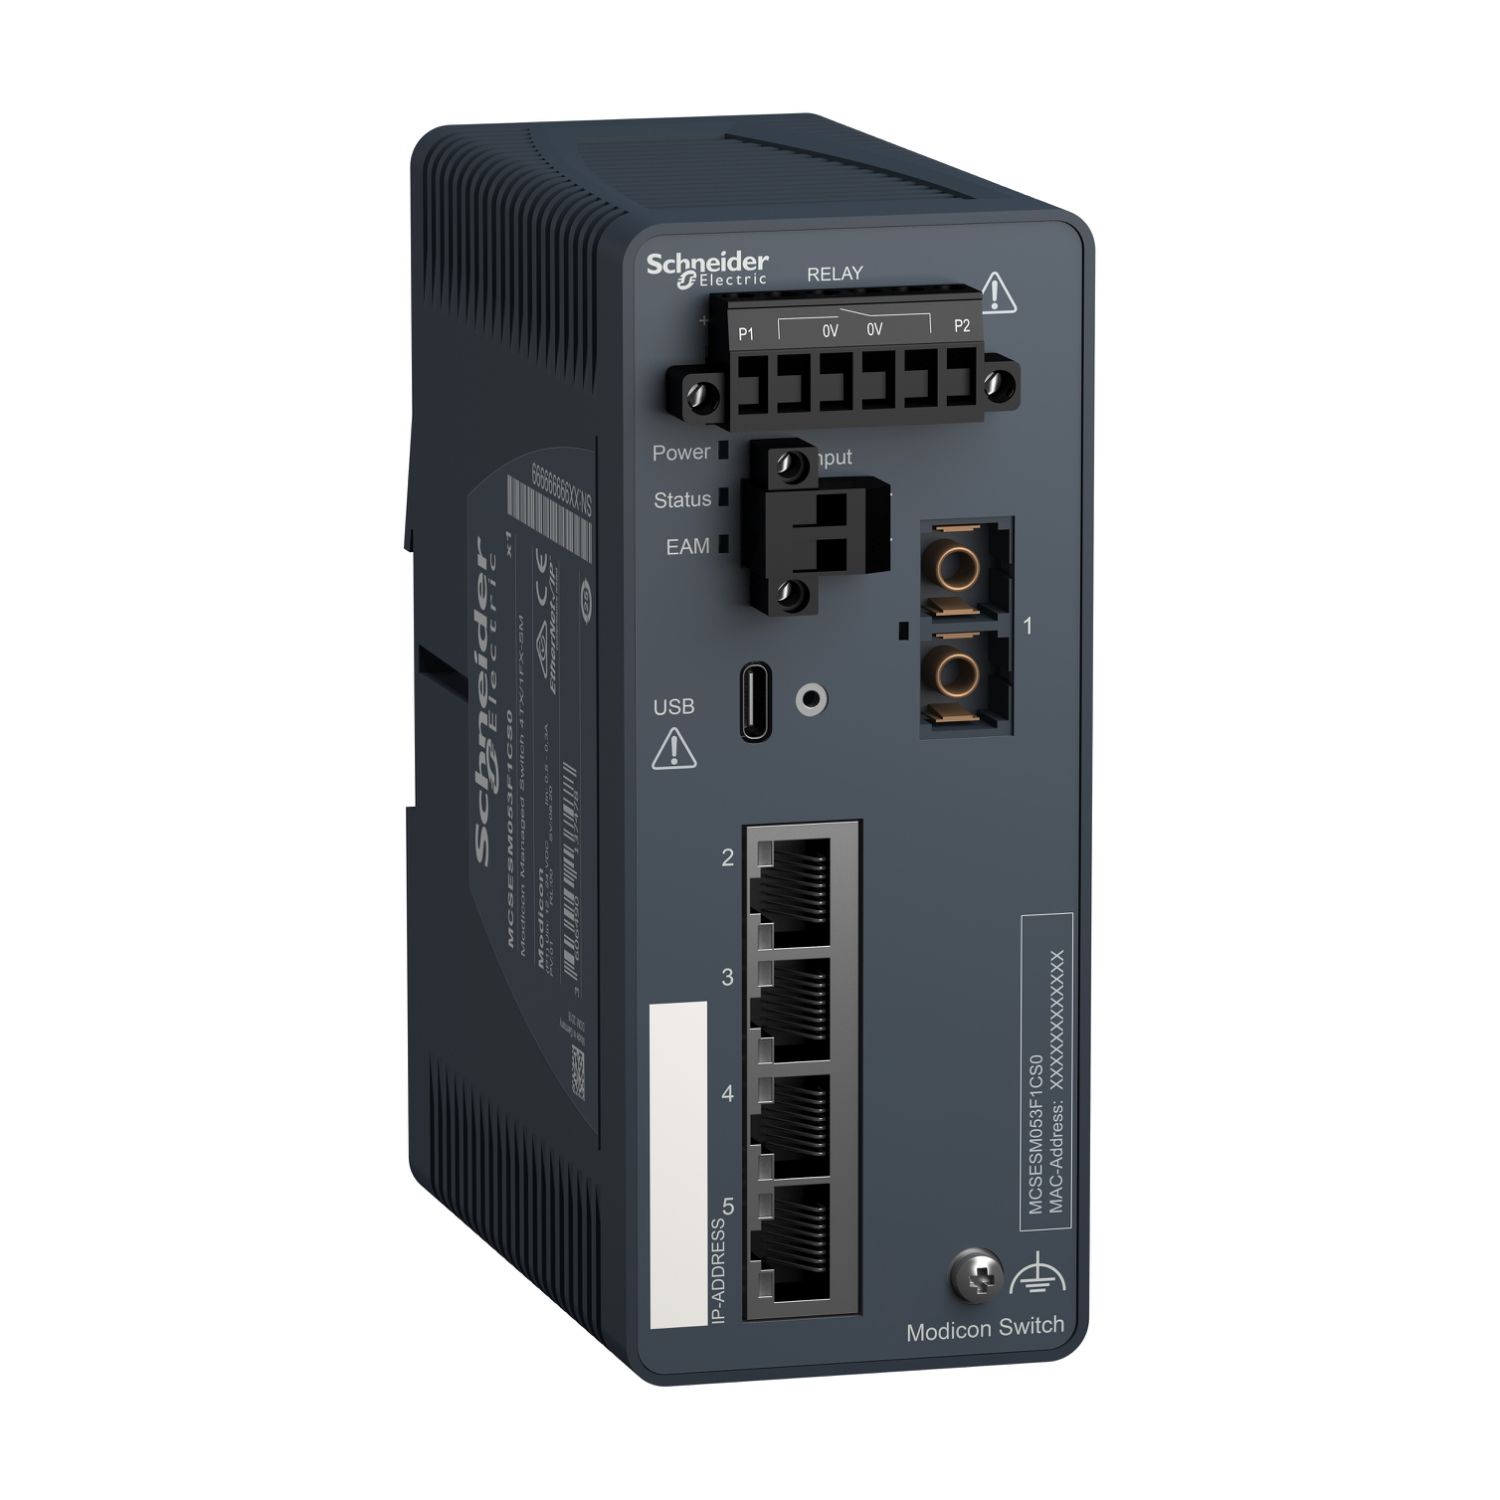 MCSESM053F1CS0 network switch, Modicon Networking, managed, 4 ports for copper with 1 port for fiber optic, singlemode